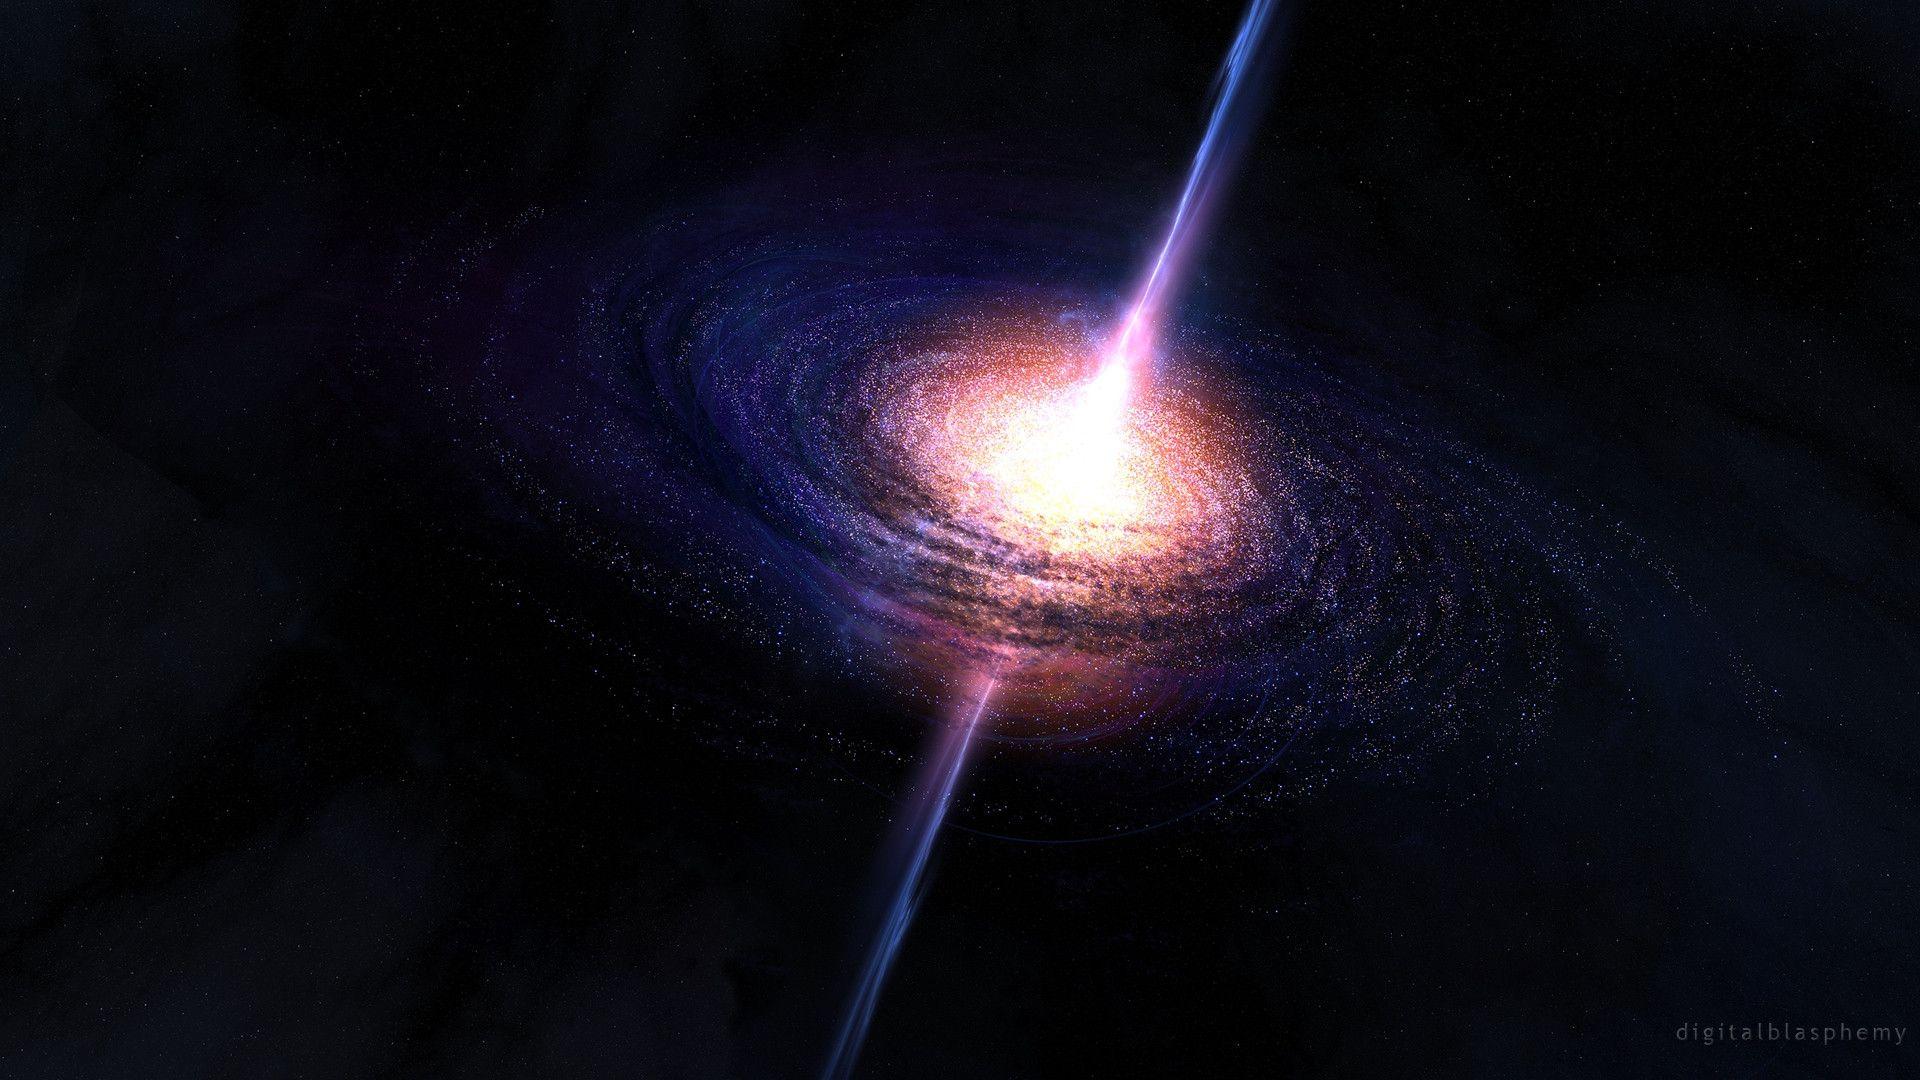 Supermassive Black Hole Wallpapers - Top Free Supermassive Black Hole